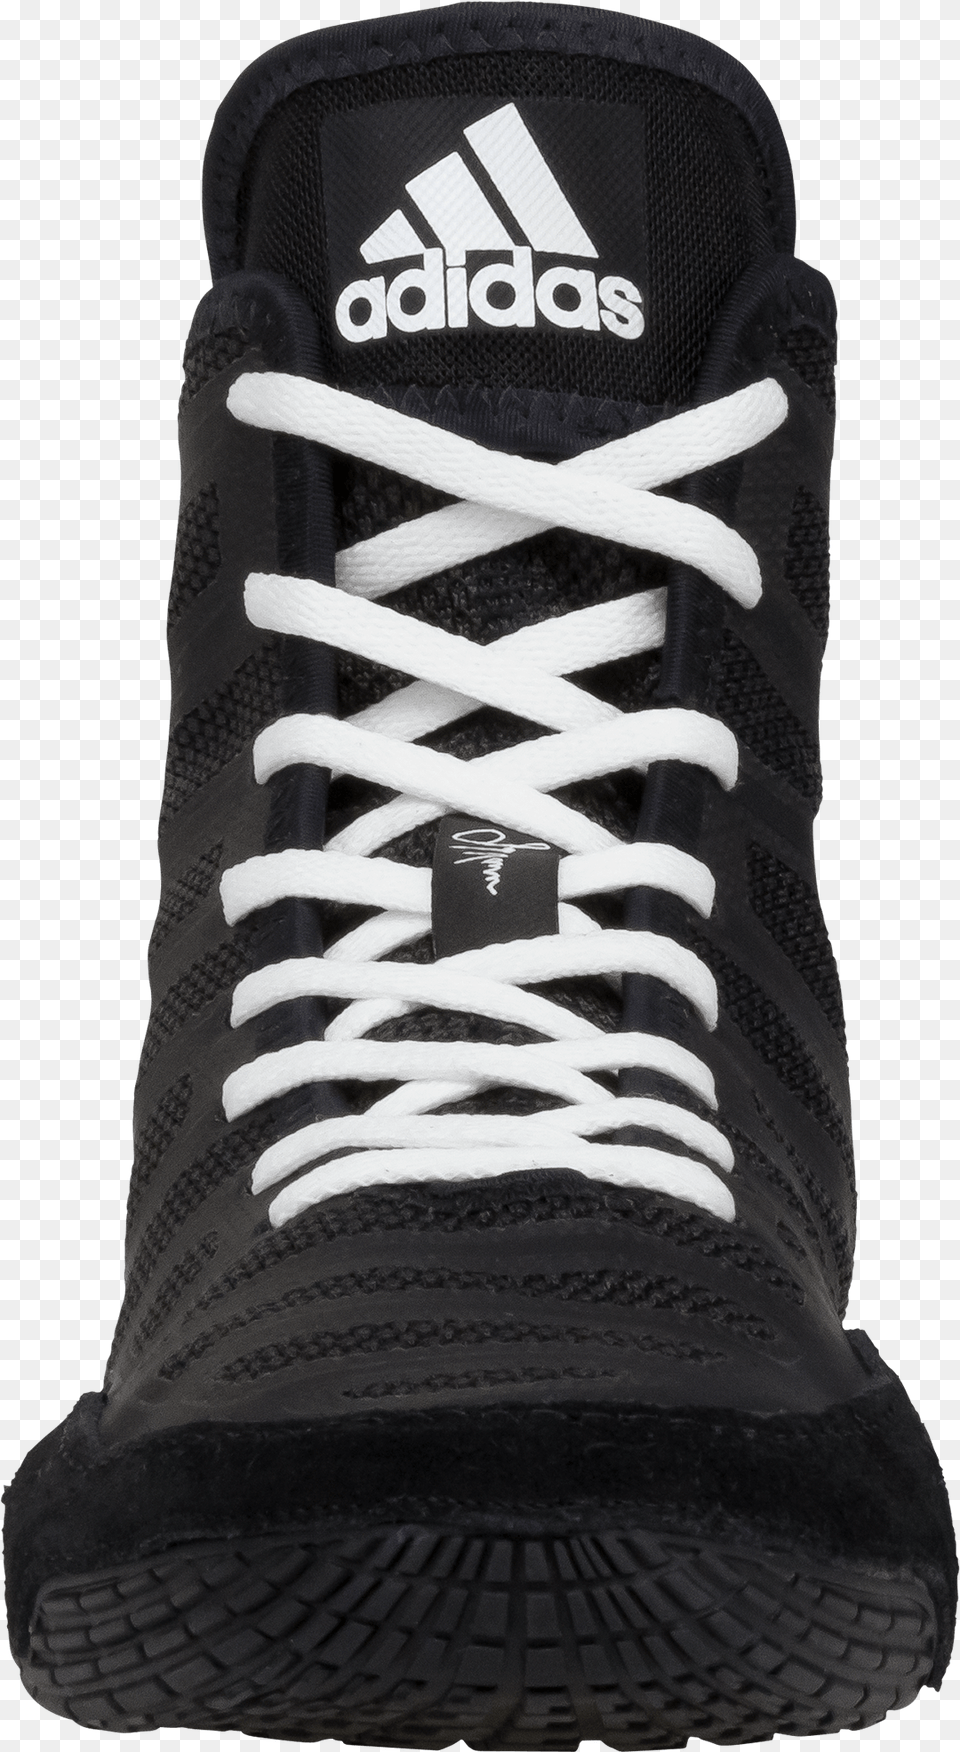 Adidas Shoes Clipart One Shoe Black Adidas Shoes Front, Clothing, Footwear, Sneaker, Running Shoe Png Image